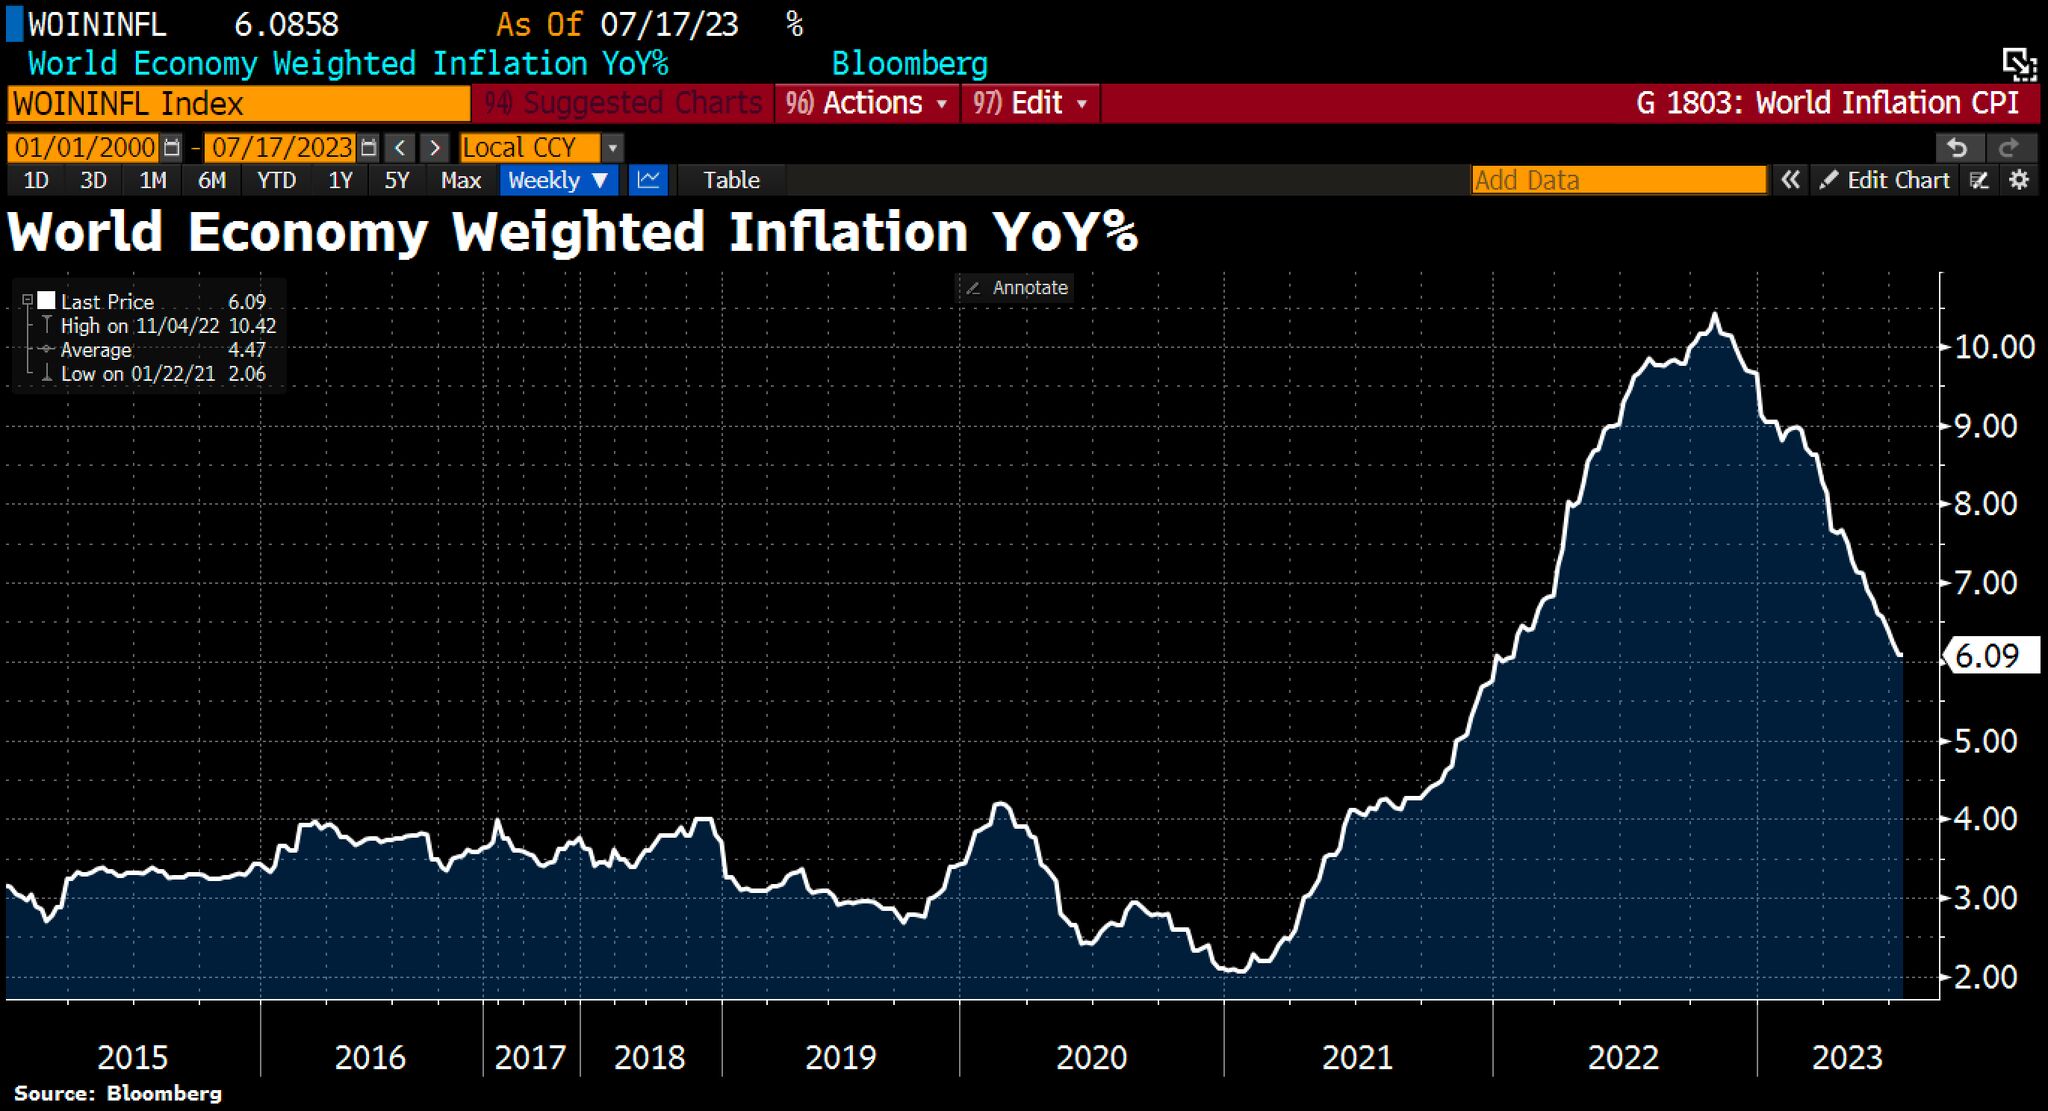 Economists polled by German research institute Ifo expect global inflation to avg 7% in 2023, before slightly easing to 6% in 2024.